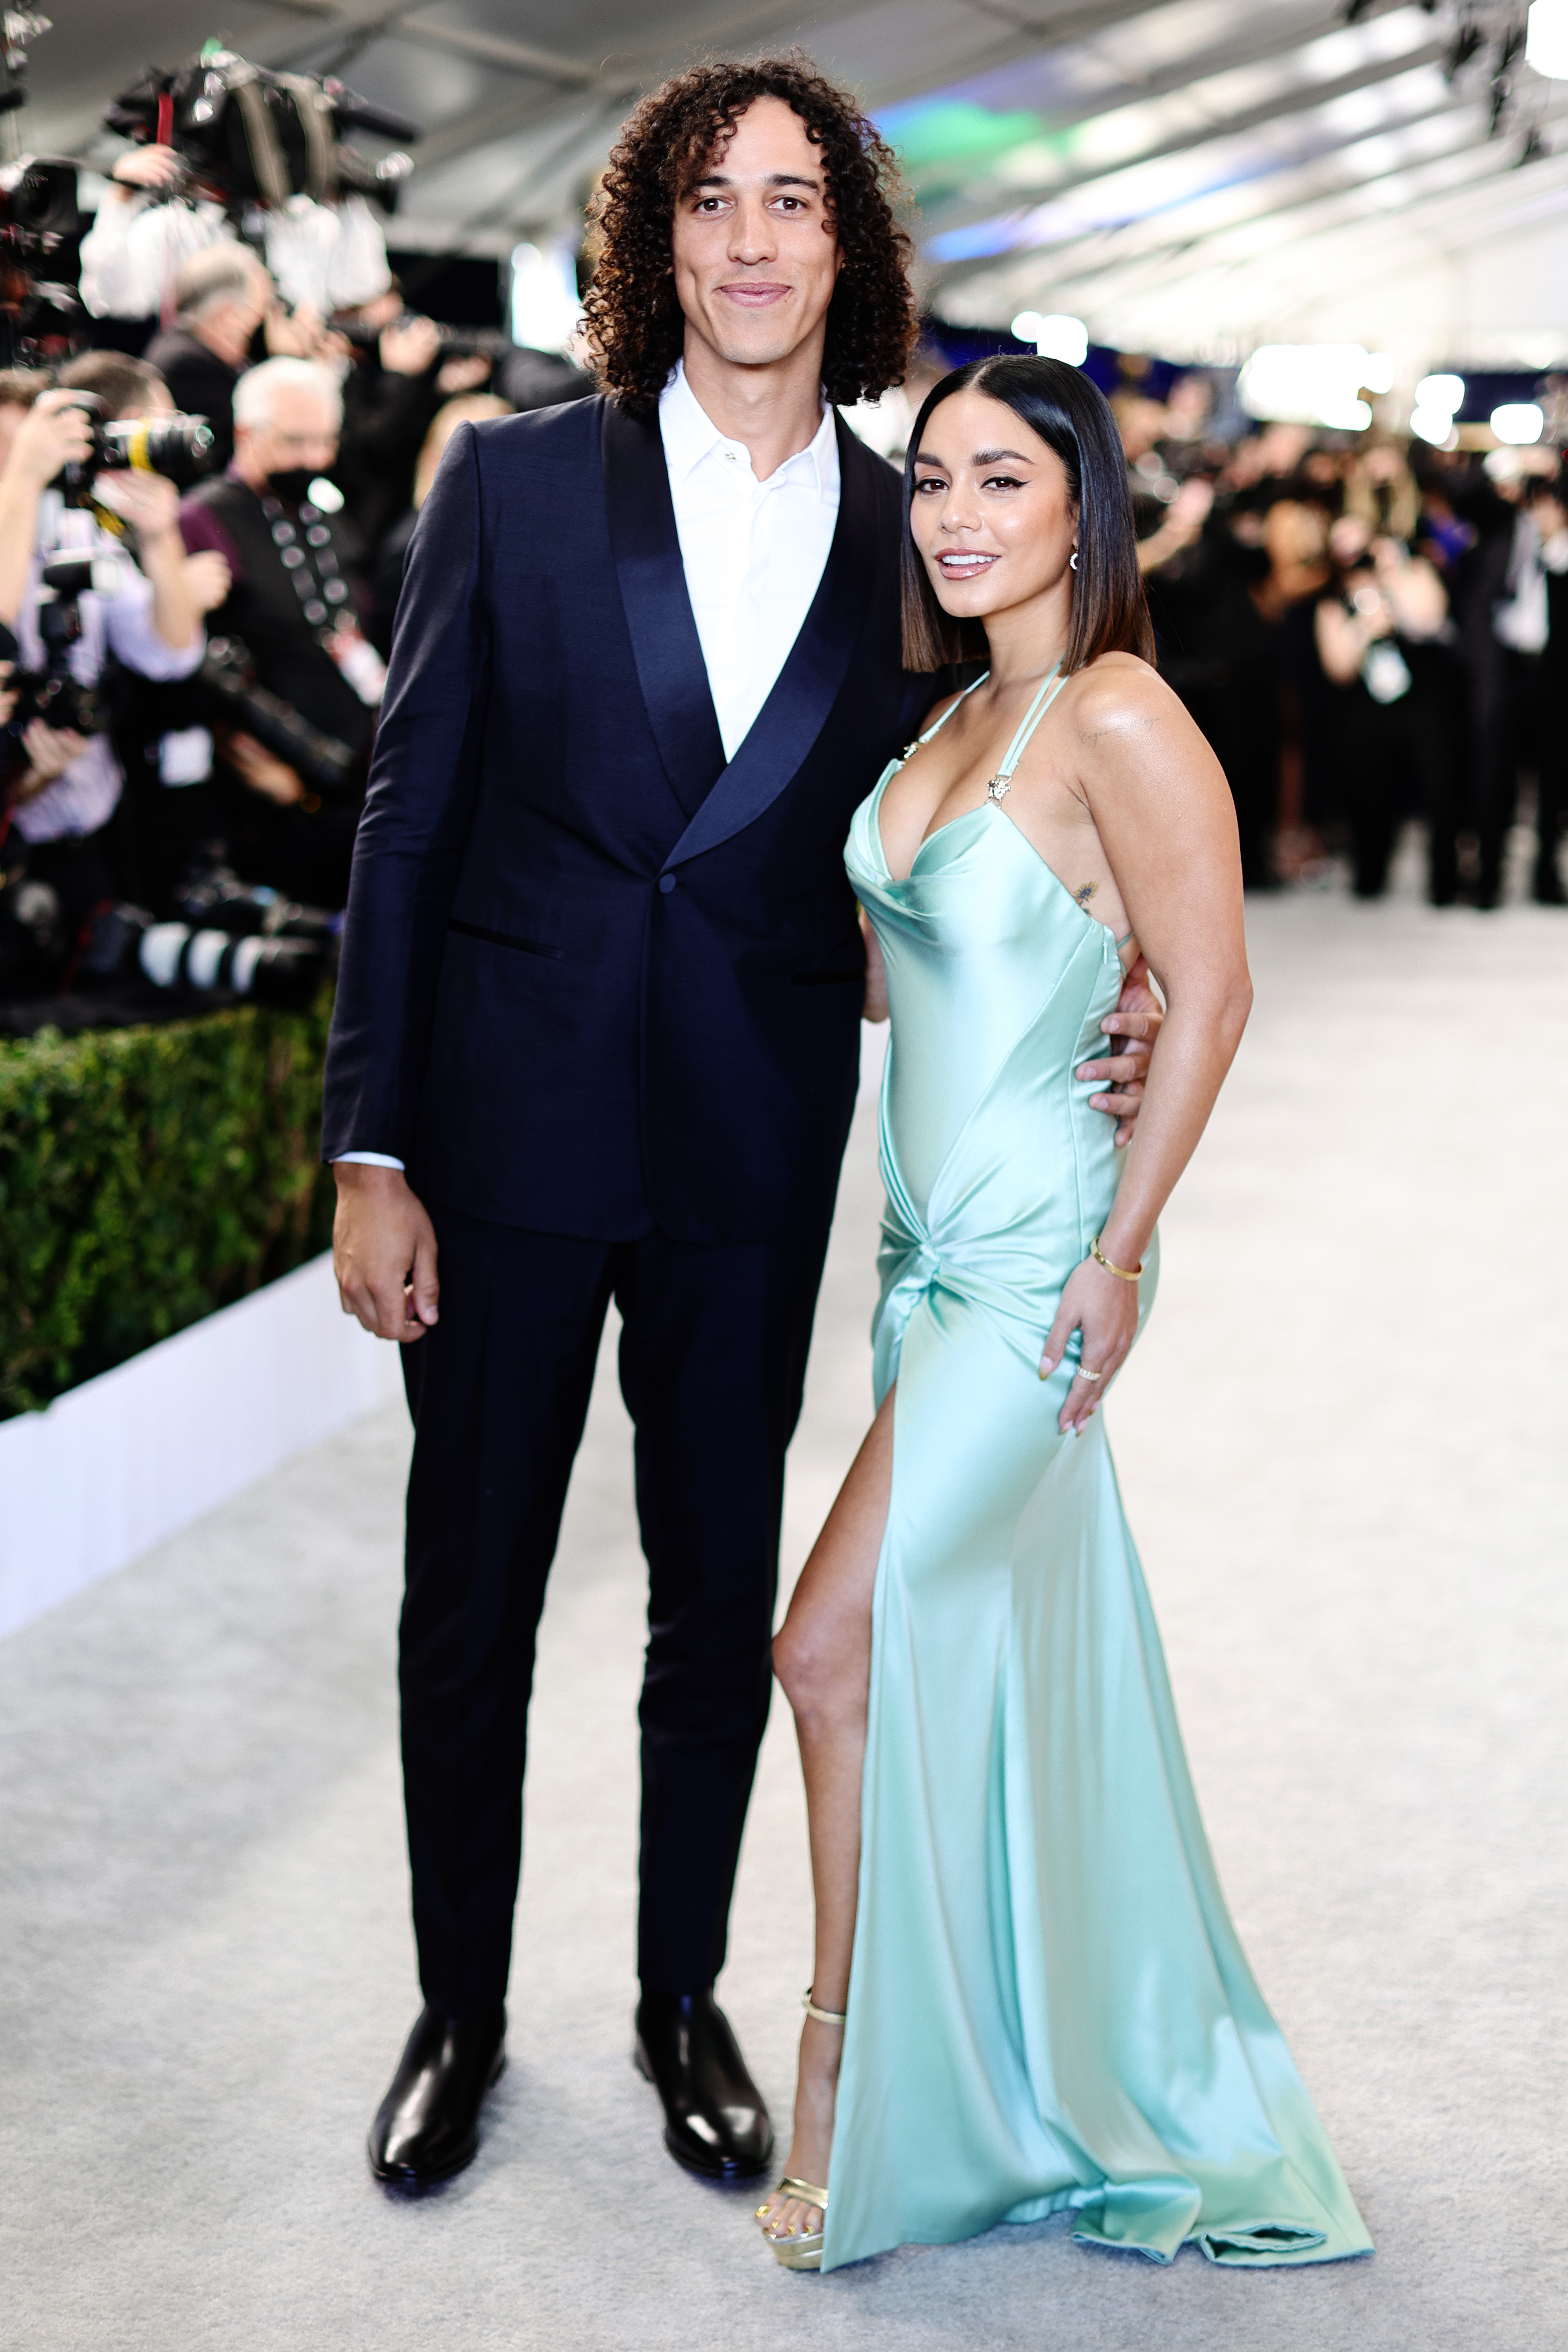 The couple posing together on the red carpet: Cole in a classic suit and Vanessa in a satin gown with a thigh-high slit